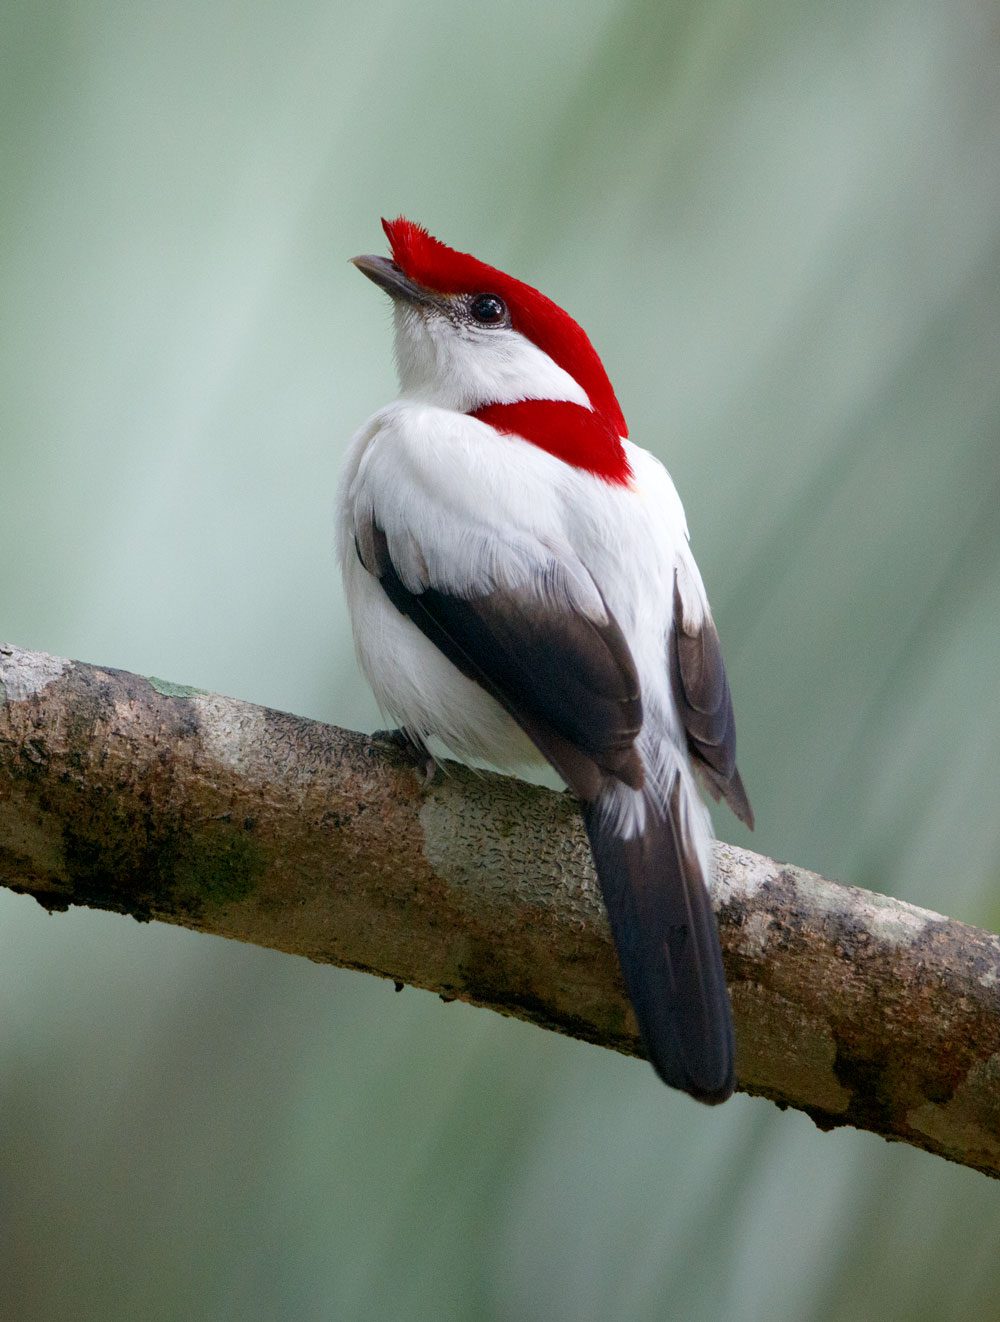 Aquasis biologist Weber Silva has closely studied the breeding biology of Araripe Manakins in their wet-forest habitat. Silva says the red head of the male Araripe Manakin is derived from pigments in the brightly colored berries that the birds eat. Head color plays an important role in sexual selection. The males seek perches in forest openings, where sunlight shines through the canopy and reflects off their blazing pompadours. Photo by Gerrit Vyn